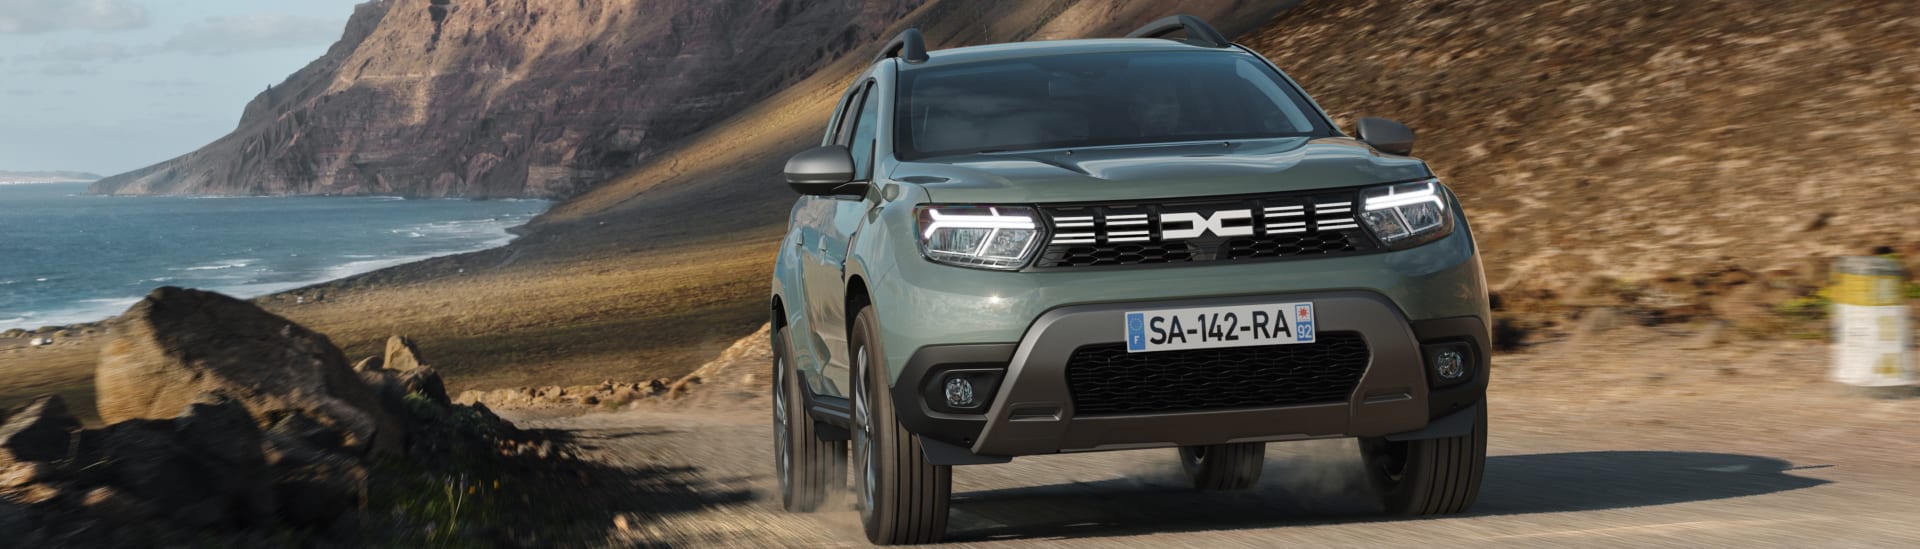 Test Drive the Dacia Duster